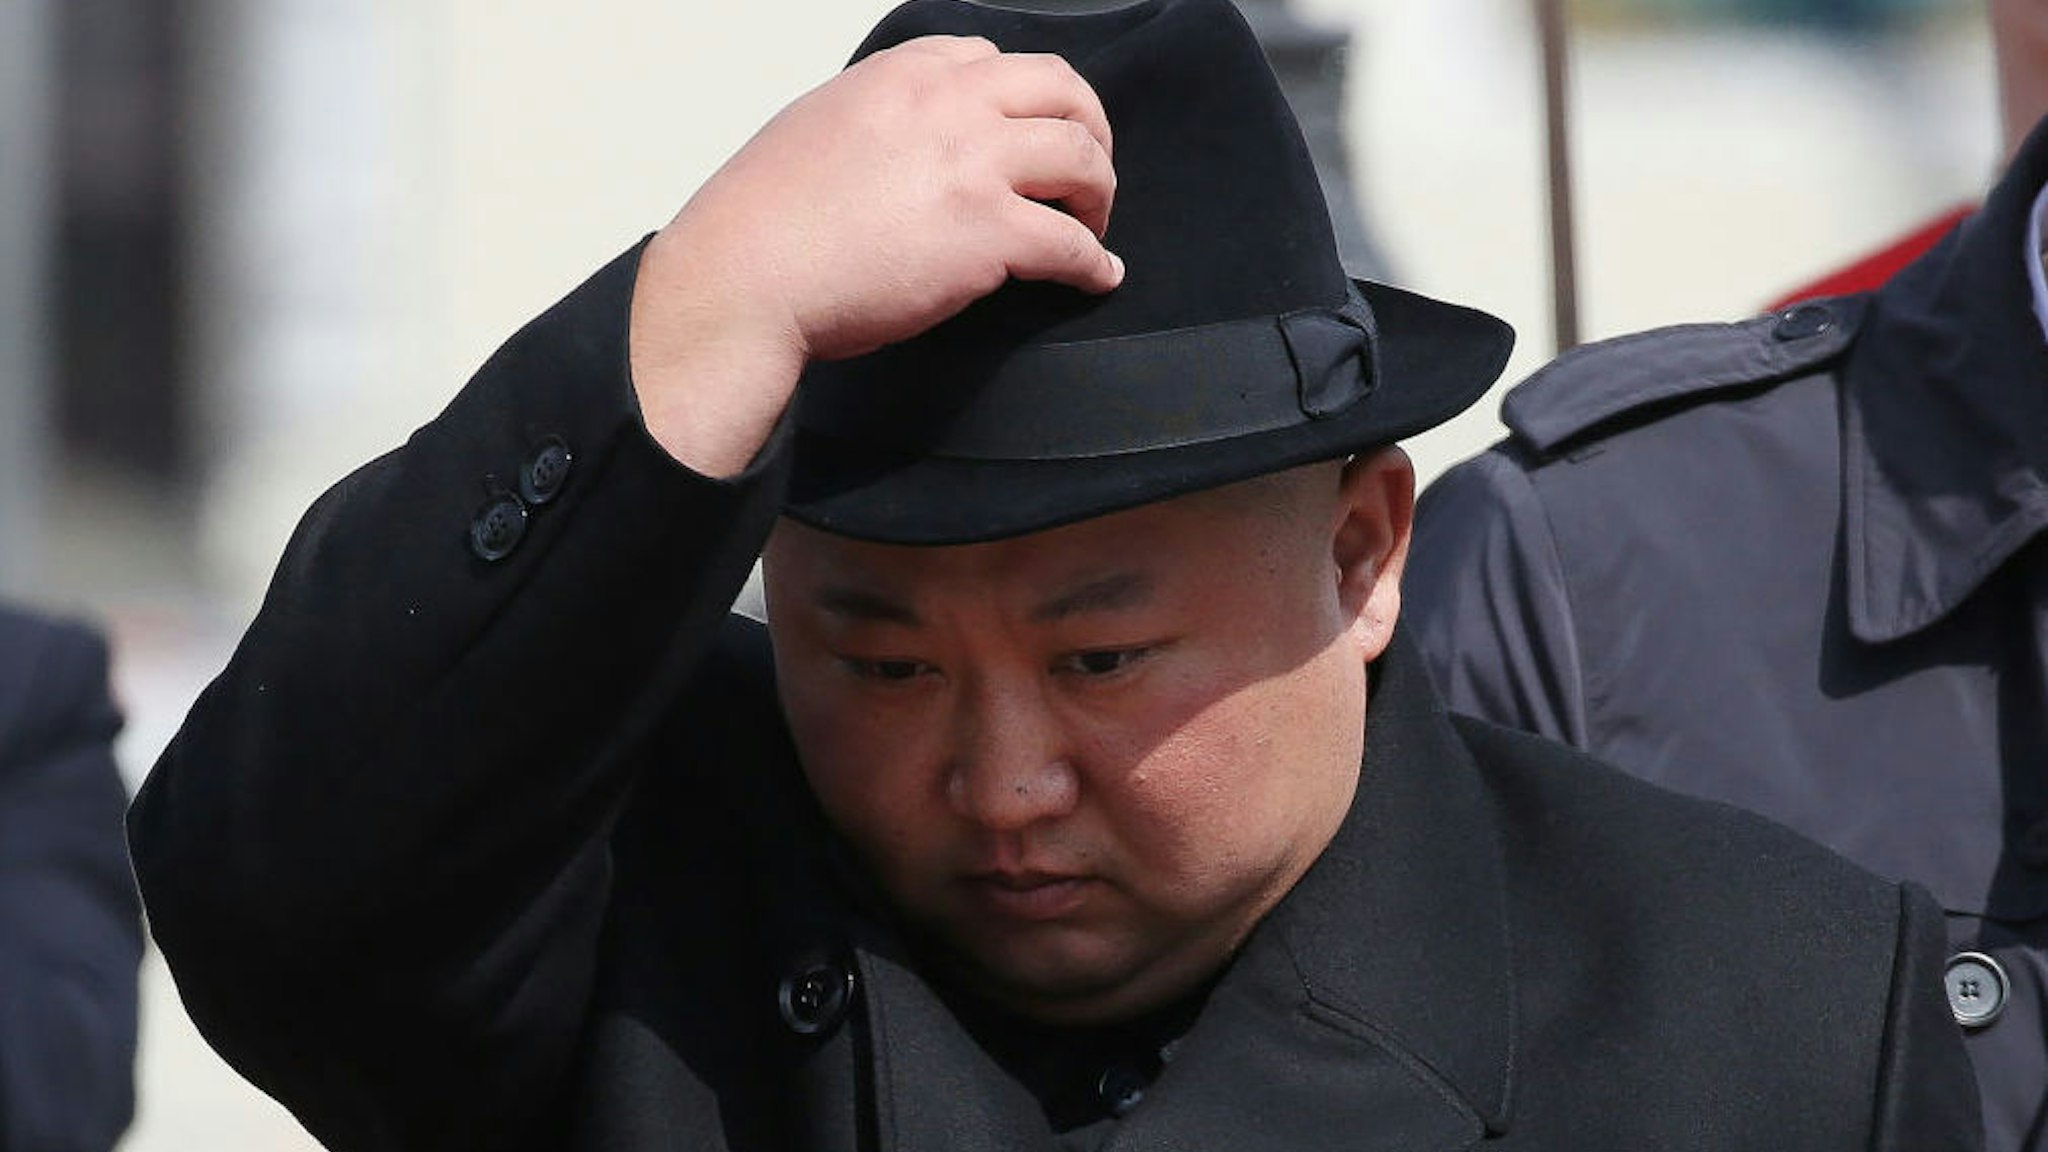 Bloomberg Pictures Of The Year 2019: Polarizing Power. Kim Jong Un, North Korea's leader, prepares for his departure to North Korea at the railway station in Vladivostok, Russia, on Friday, April 26, 2019. It's been decades since the realm of global power brokers has been dominated by such polarizing figures and issues. One man, US President Donald Trump, love him or loathe him, was rarely out of the headlines.